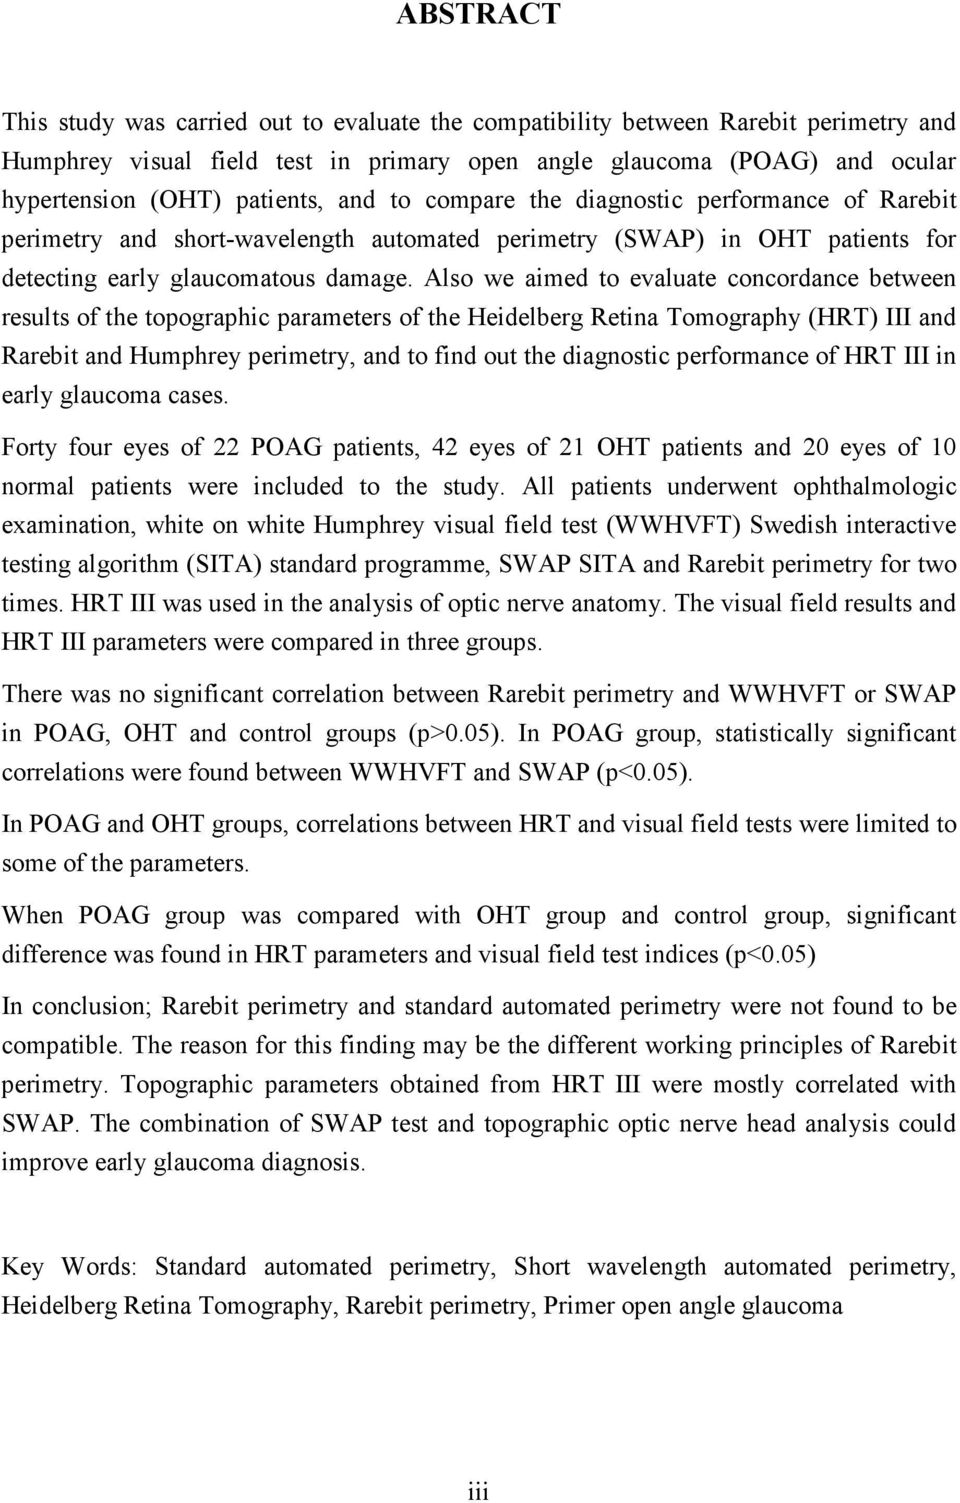 Also we aimed to evaluate concordance between results of the topographic parameters of the Heidelberg Retina Tomography (HRT) III and Rarebit and Humphrey perimetry, and to find out the diagnostic